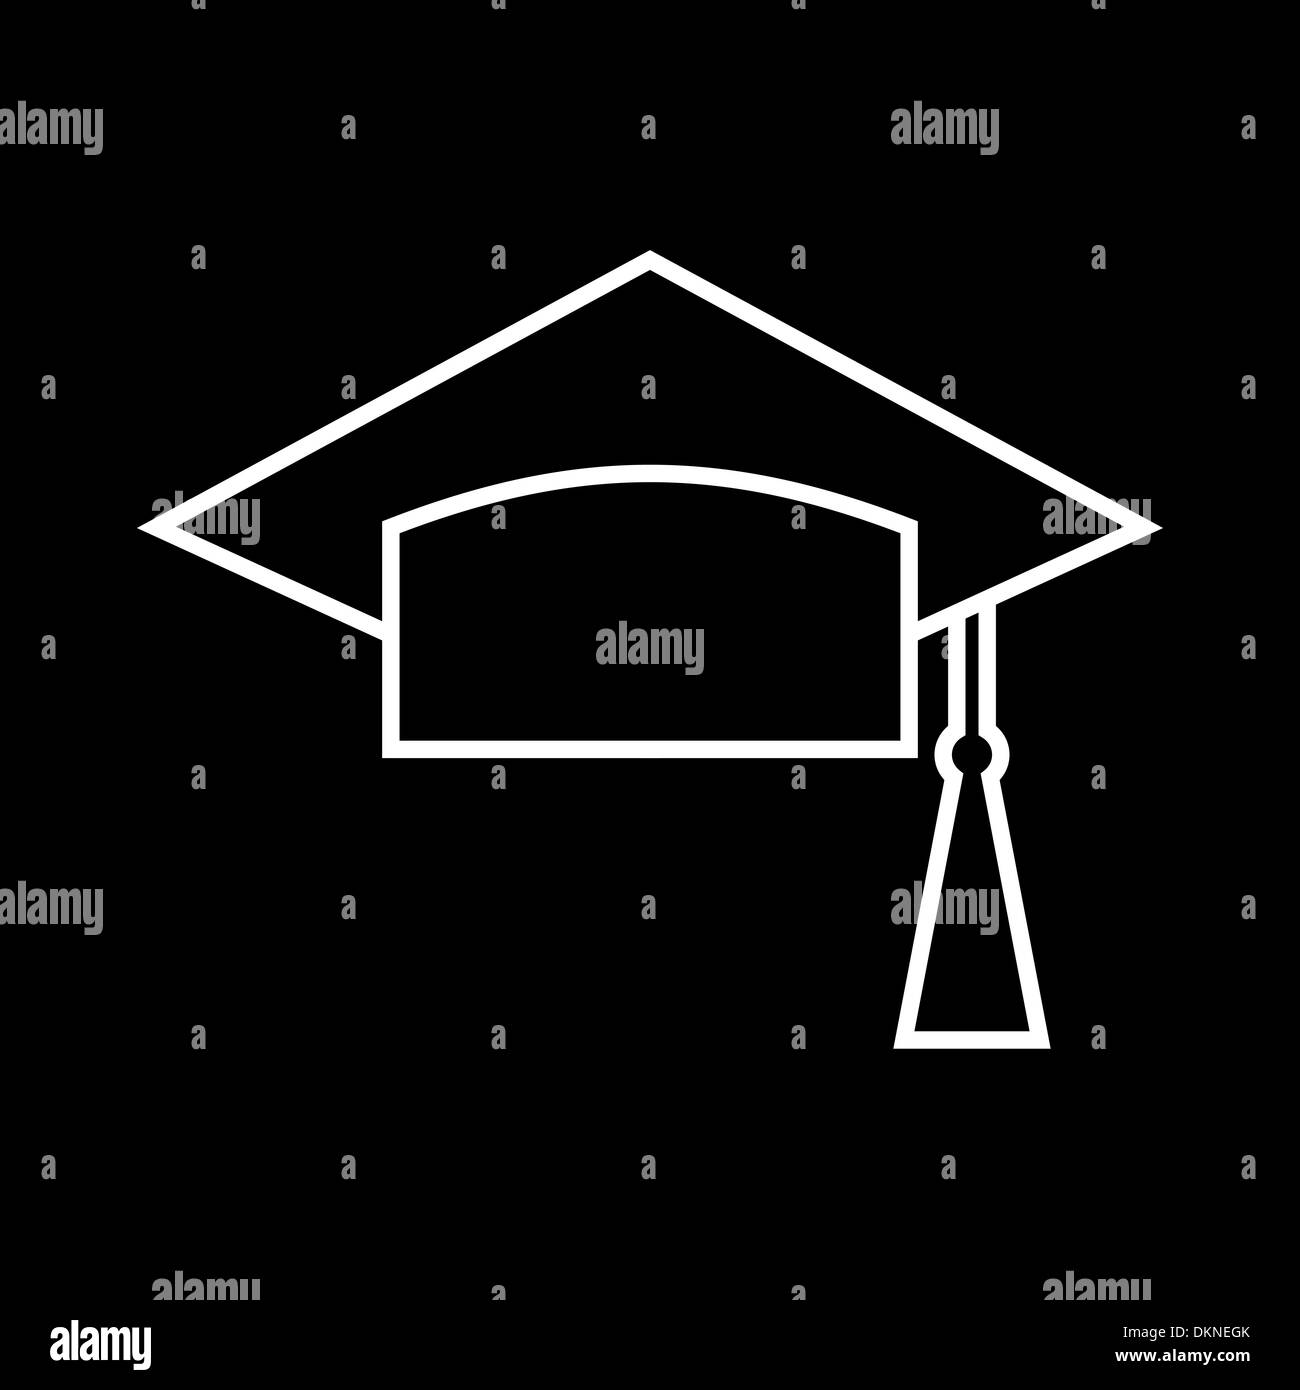 Outlined Mortar Board. Education symbol Stock Photo - Alamy